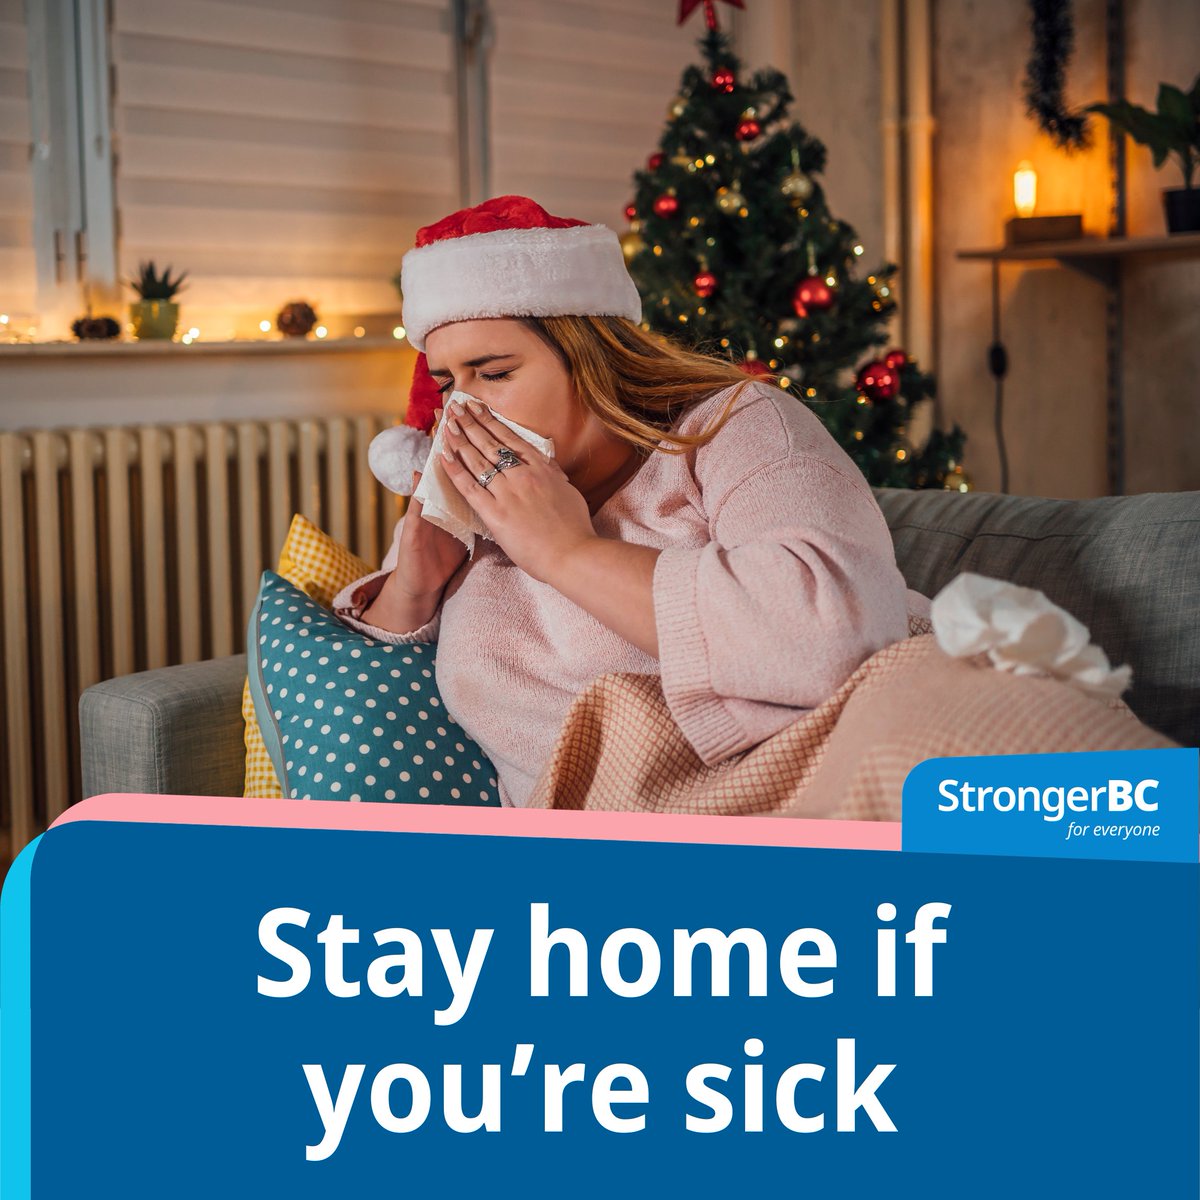 If you feel sick – particularly if you have a fever – it’s important to stay home until you feel well.

To help keep each other safe and healthy, we can all keep doing the things that work:
• Clean your hands often
• Cover your coughs and sneezes

gov.bc.ca/FluVaccine